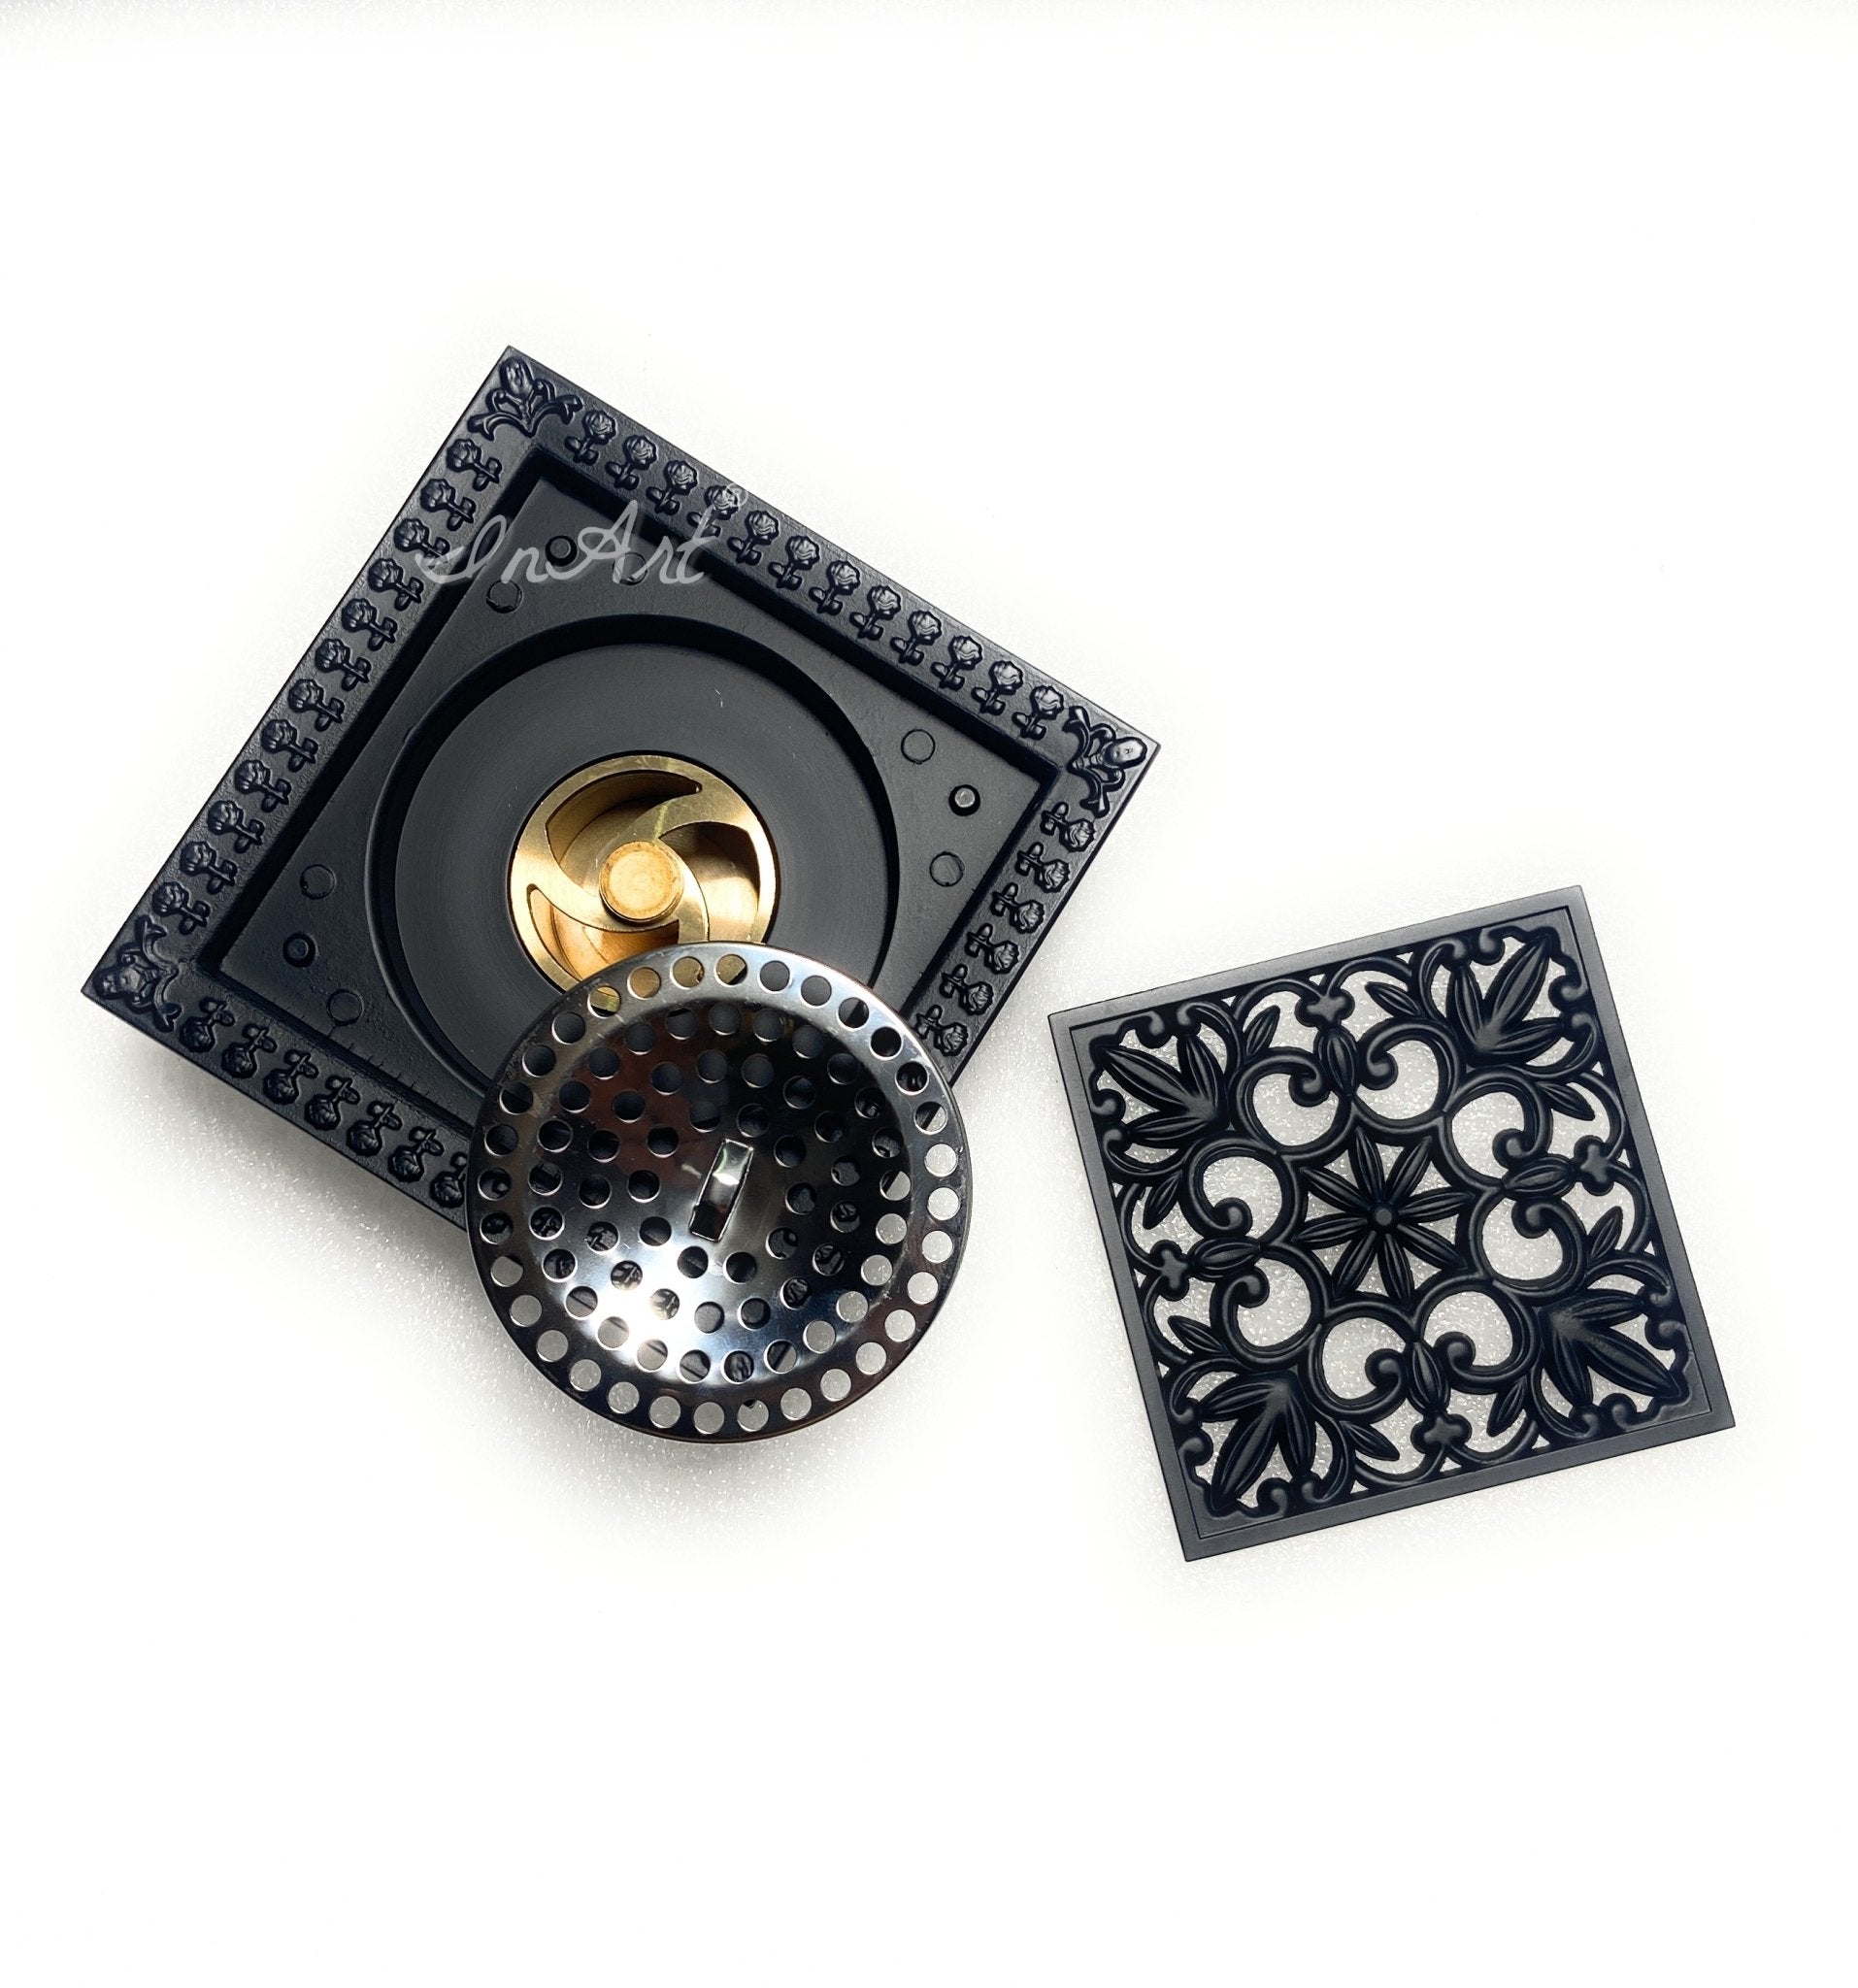 InArt Brass Square Shower Floor Drain with Removable Cover Grid Grate 5 inch Long Black Matt Color Floral Pattern - InArt-Studio-USA